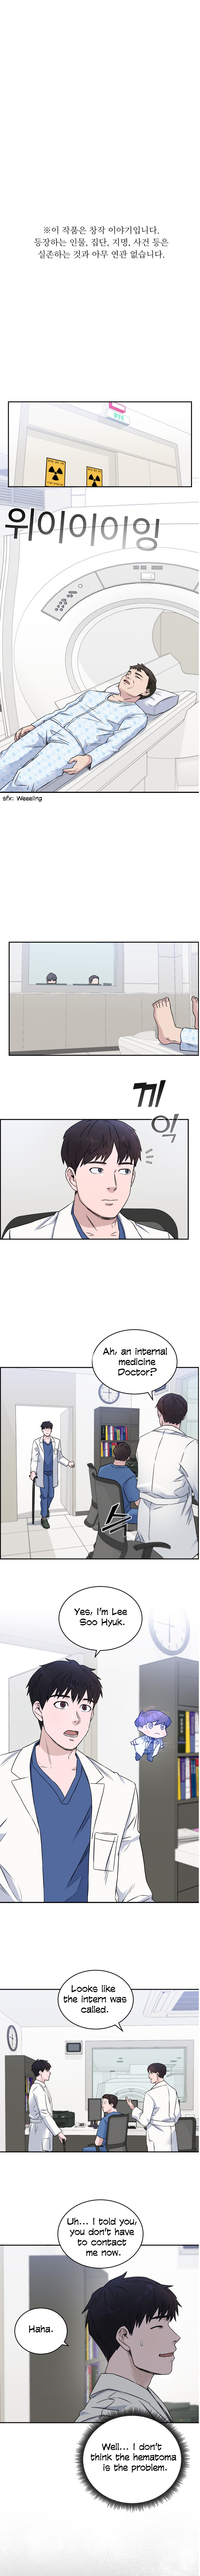 A.i. Doctor - Page 2